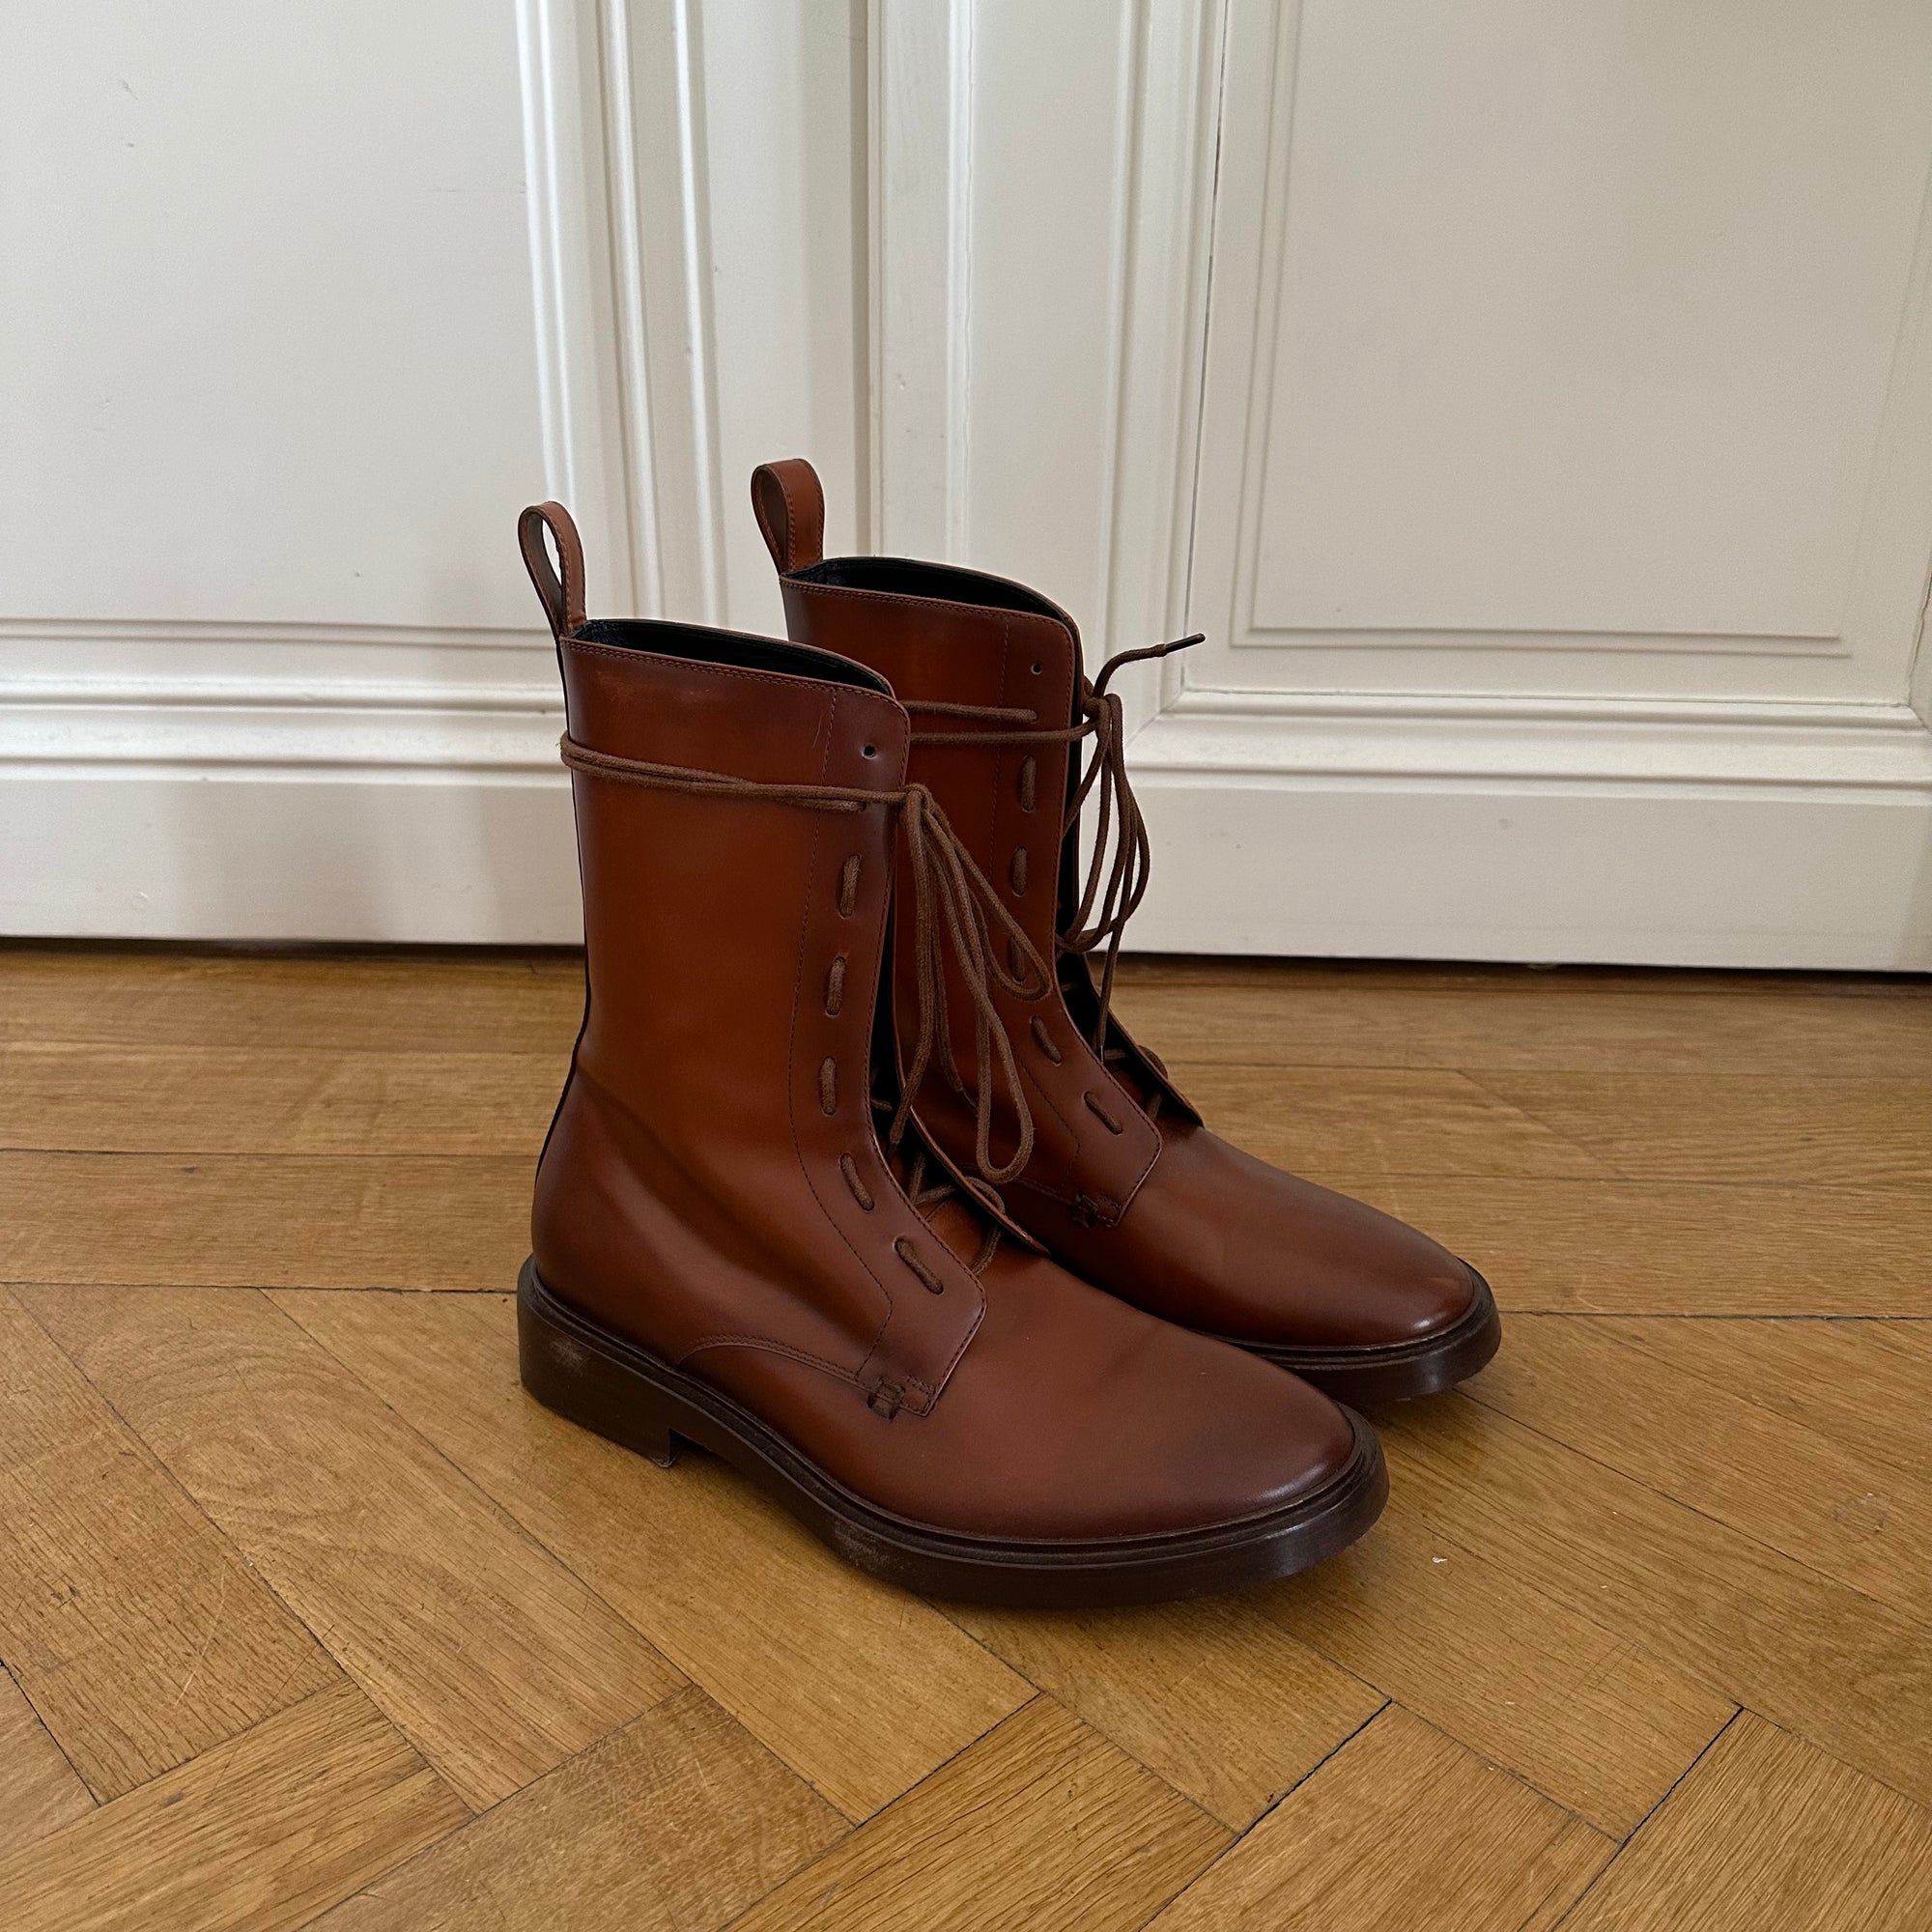 Balenciaga FW17 Brown Leather Combat Boots